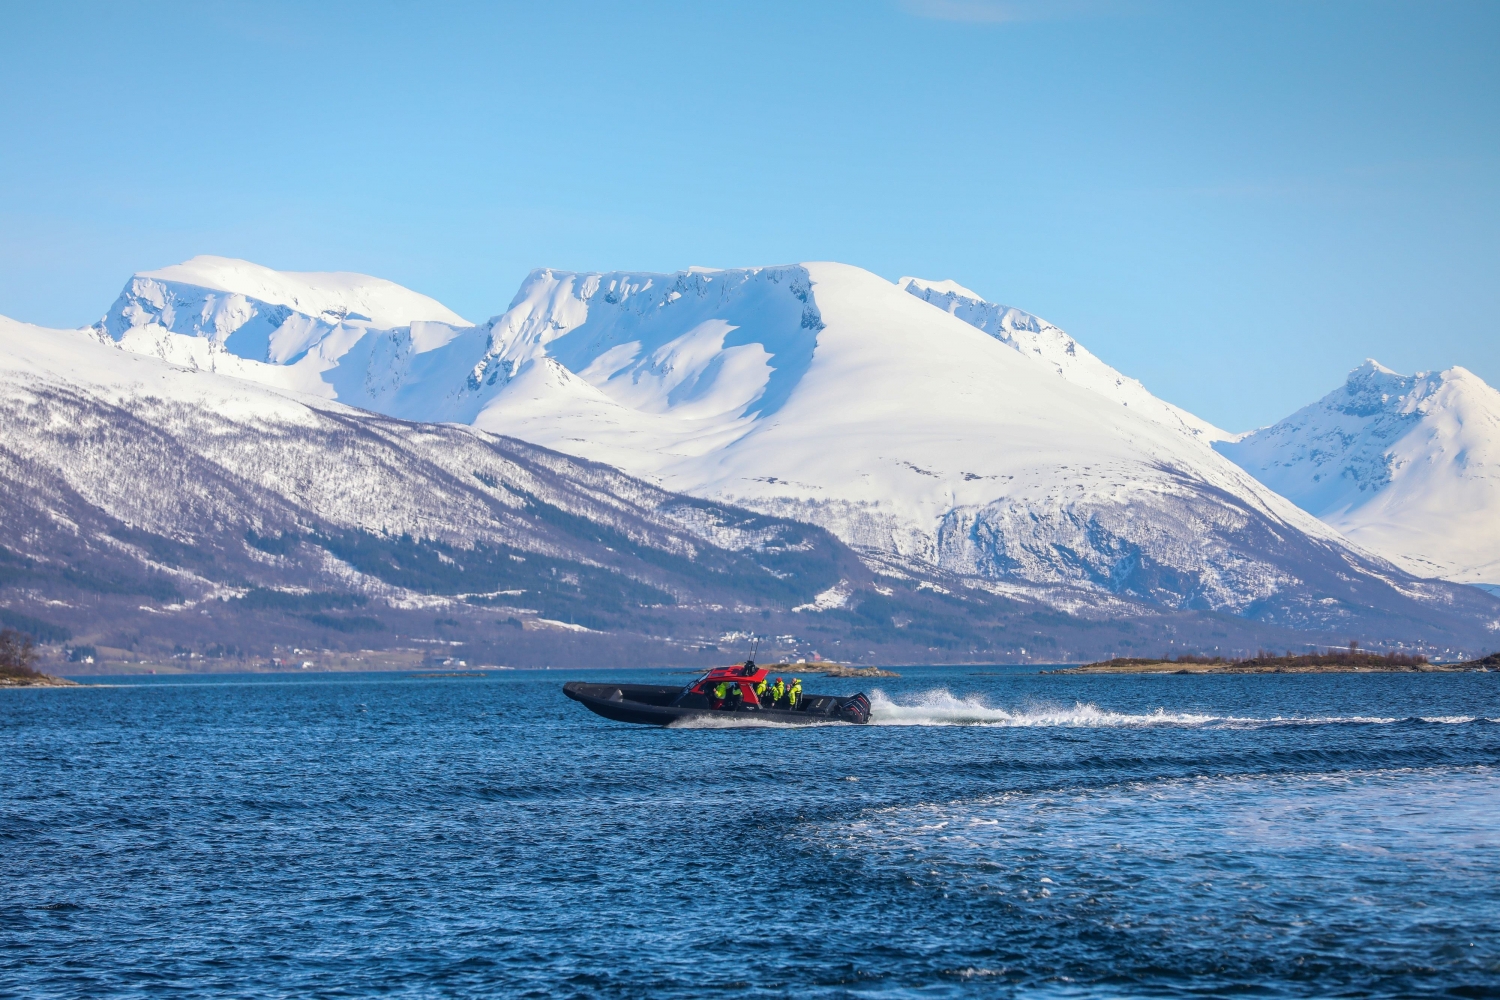 A RIB boat speeding on the water with snow covered mountains in the background